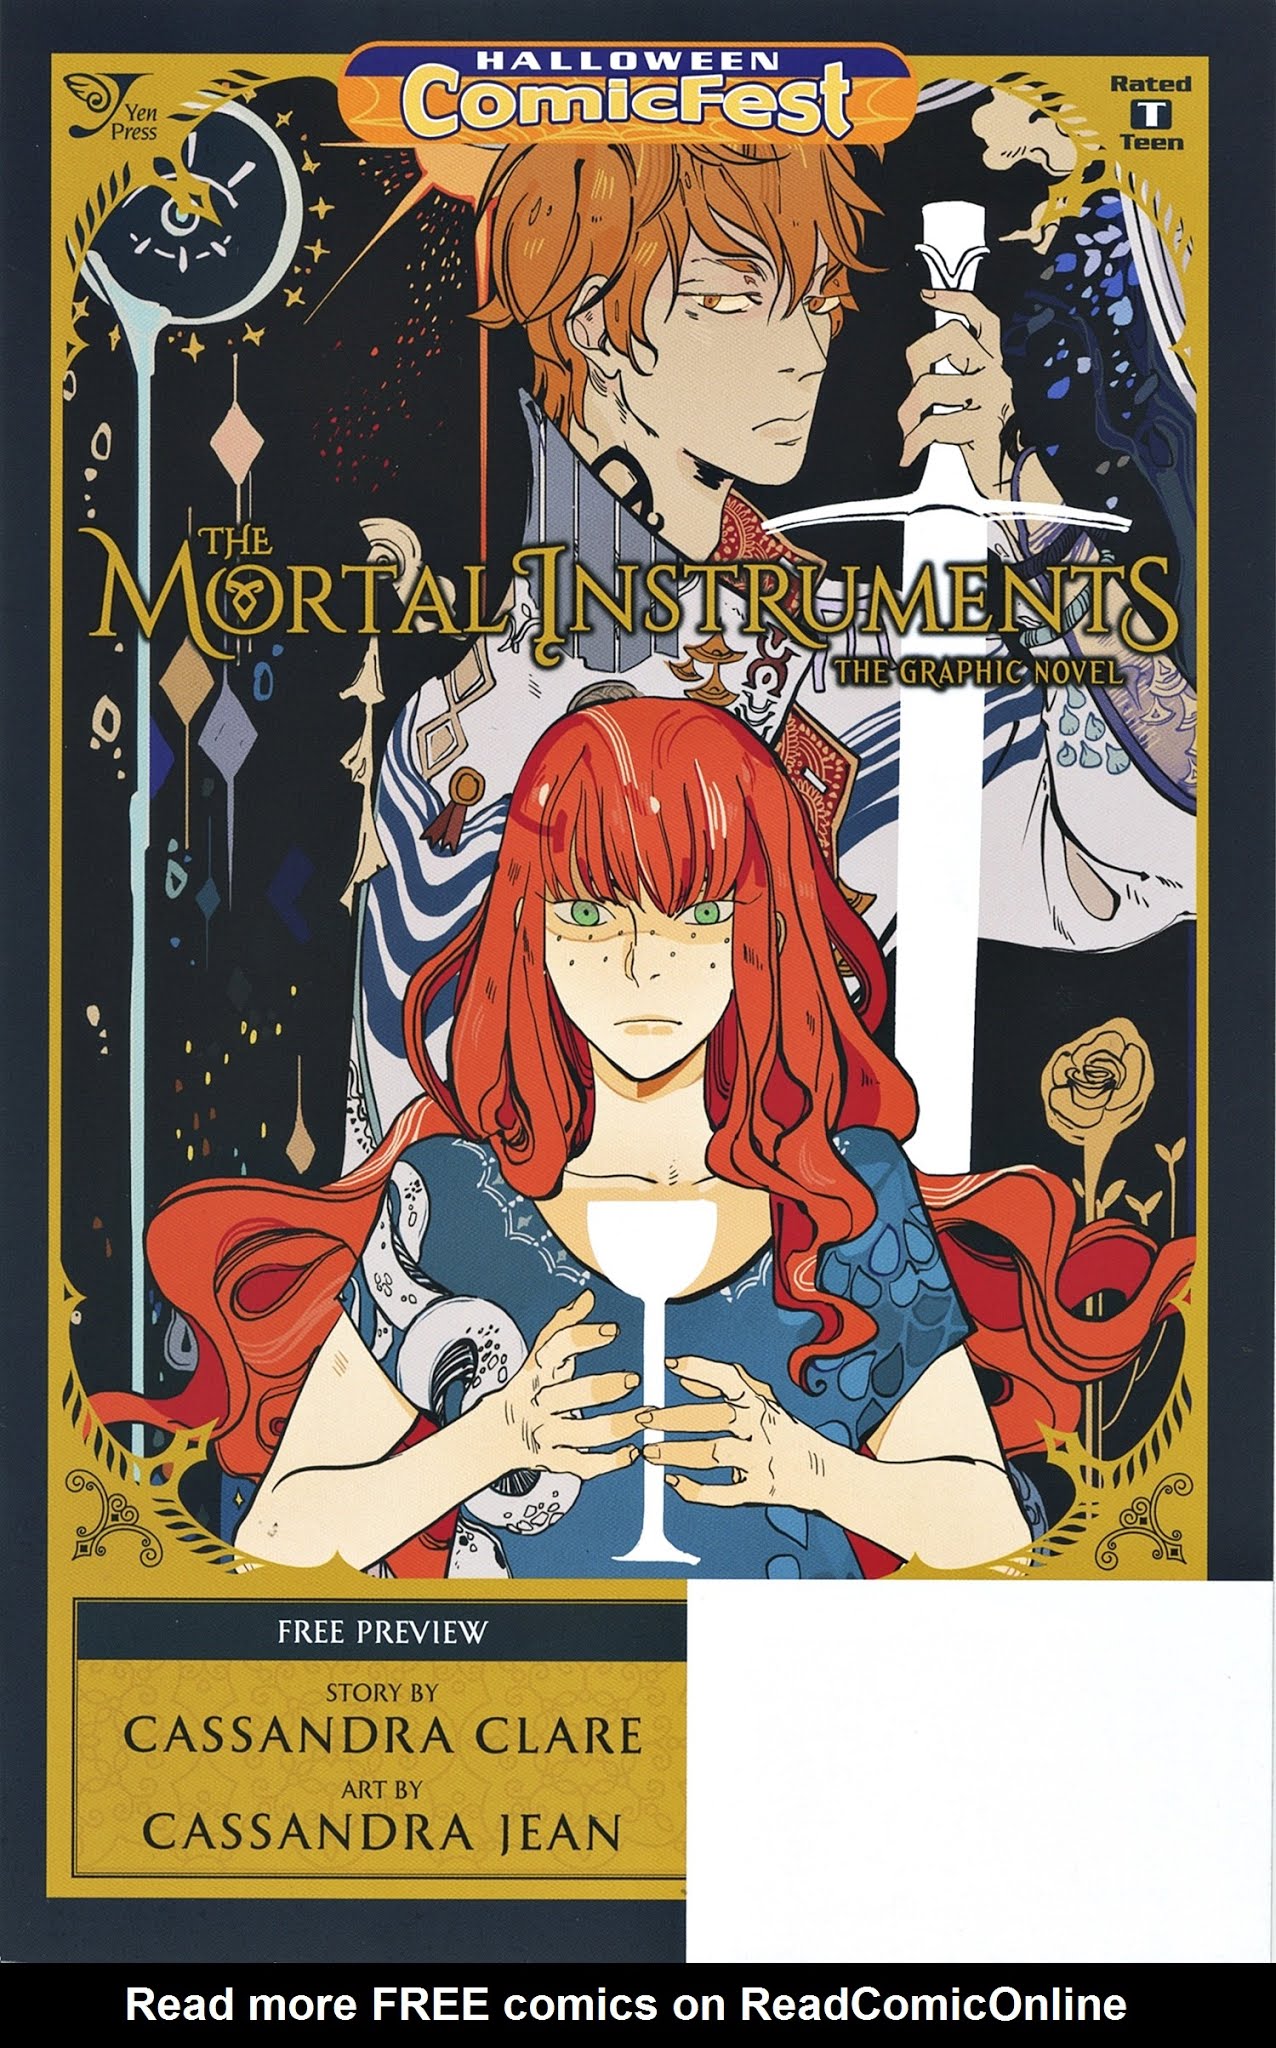 Read online The Mortal Instruments: The Graphic Novel Free Preview comic -  Issue # Full - 1